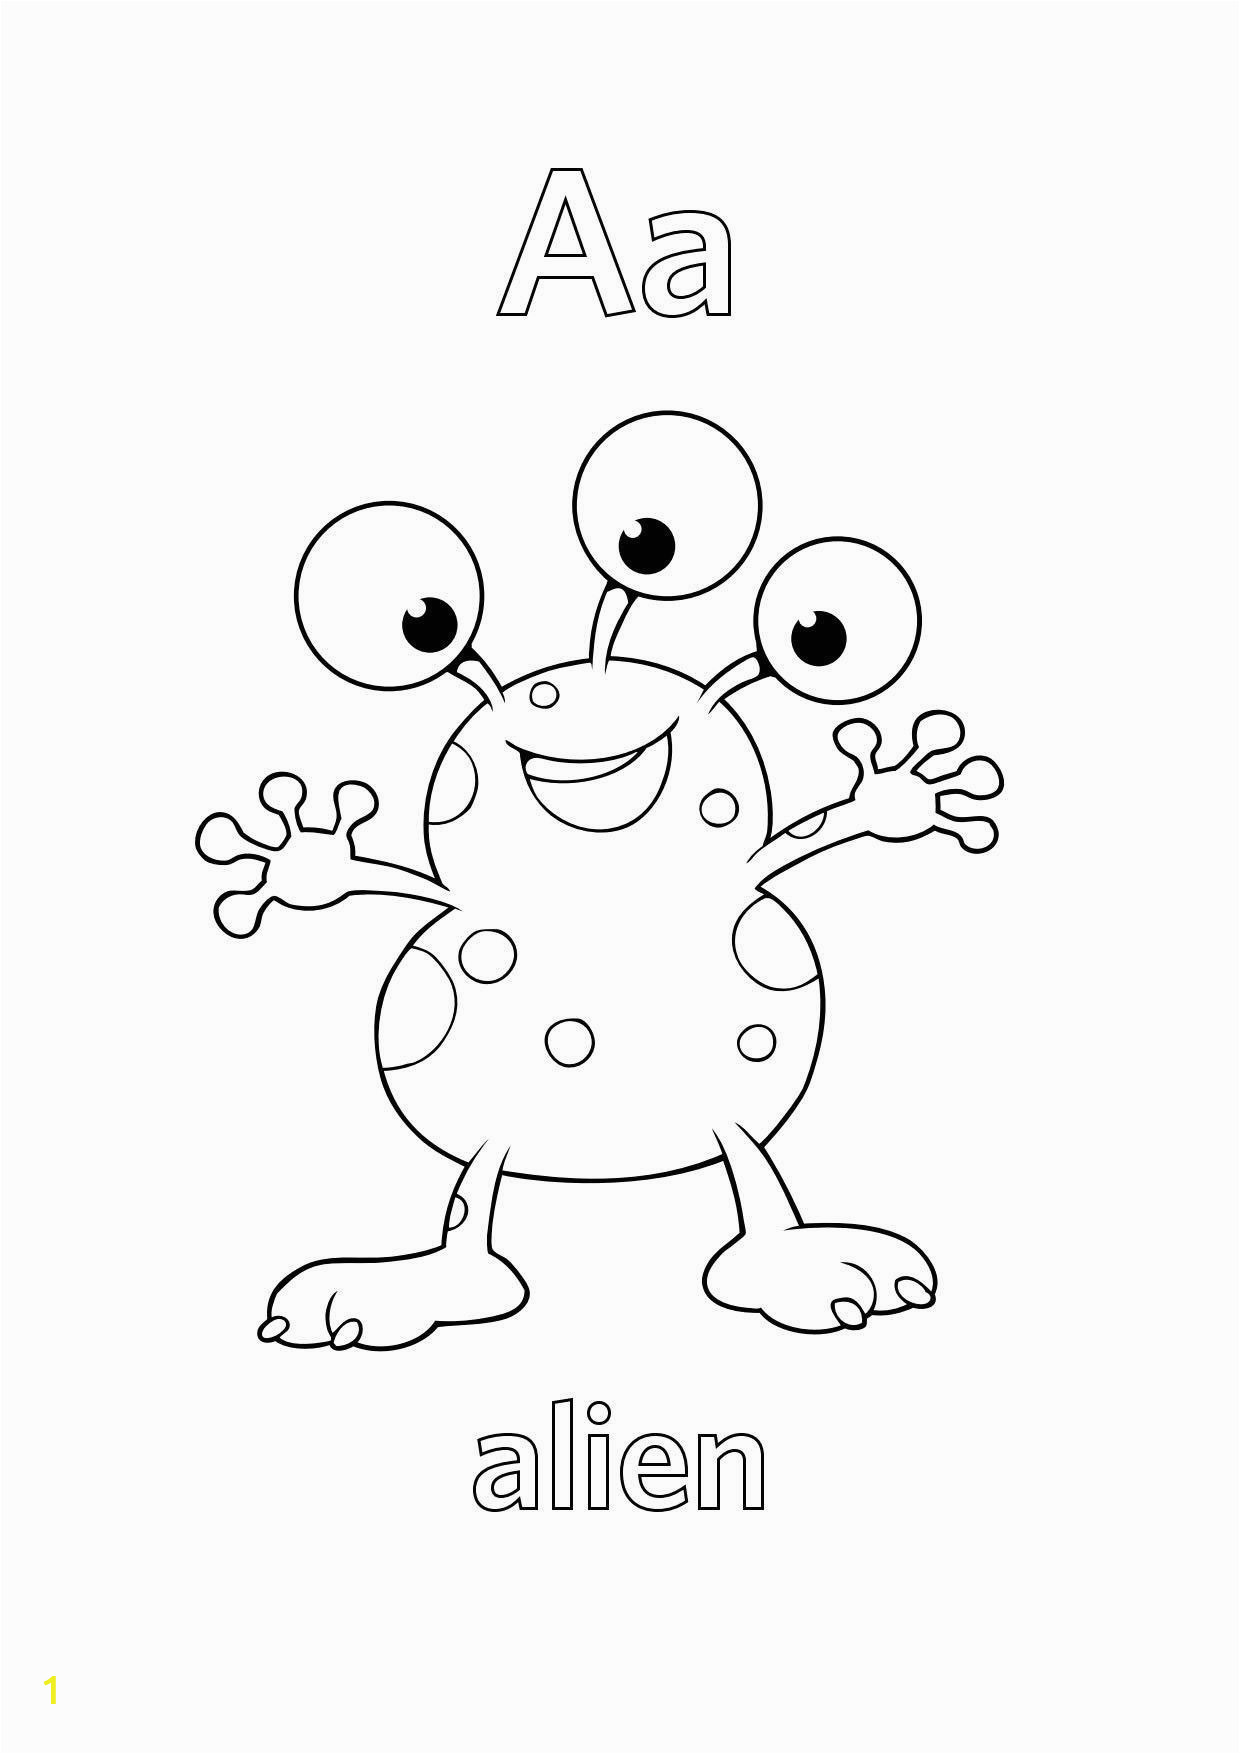 Coloring Pages Printable Letters Of the Alphabet 3 Coloring Pages to Print Alphabet Letters Worksheets Schools